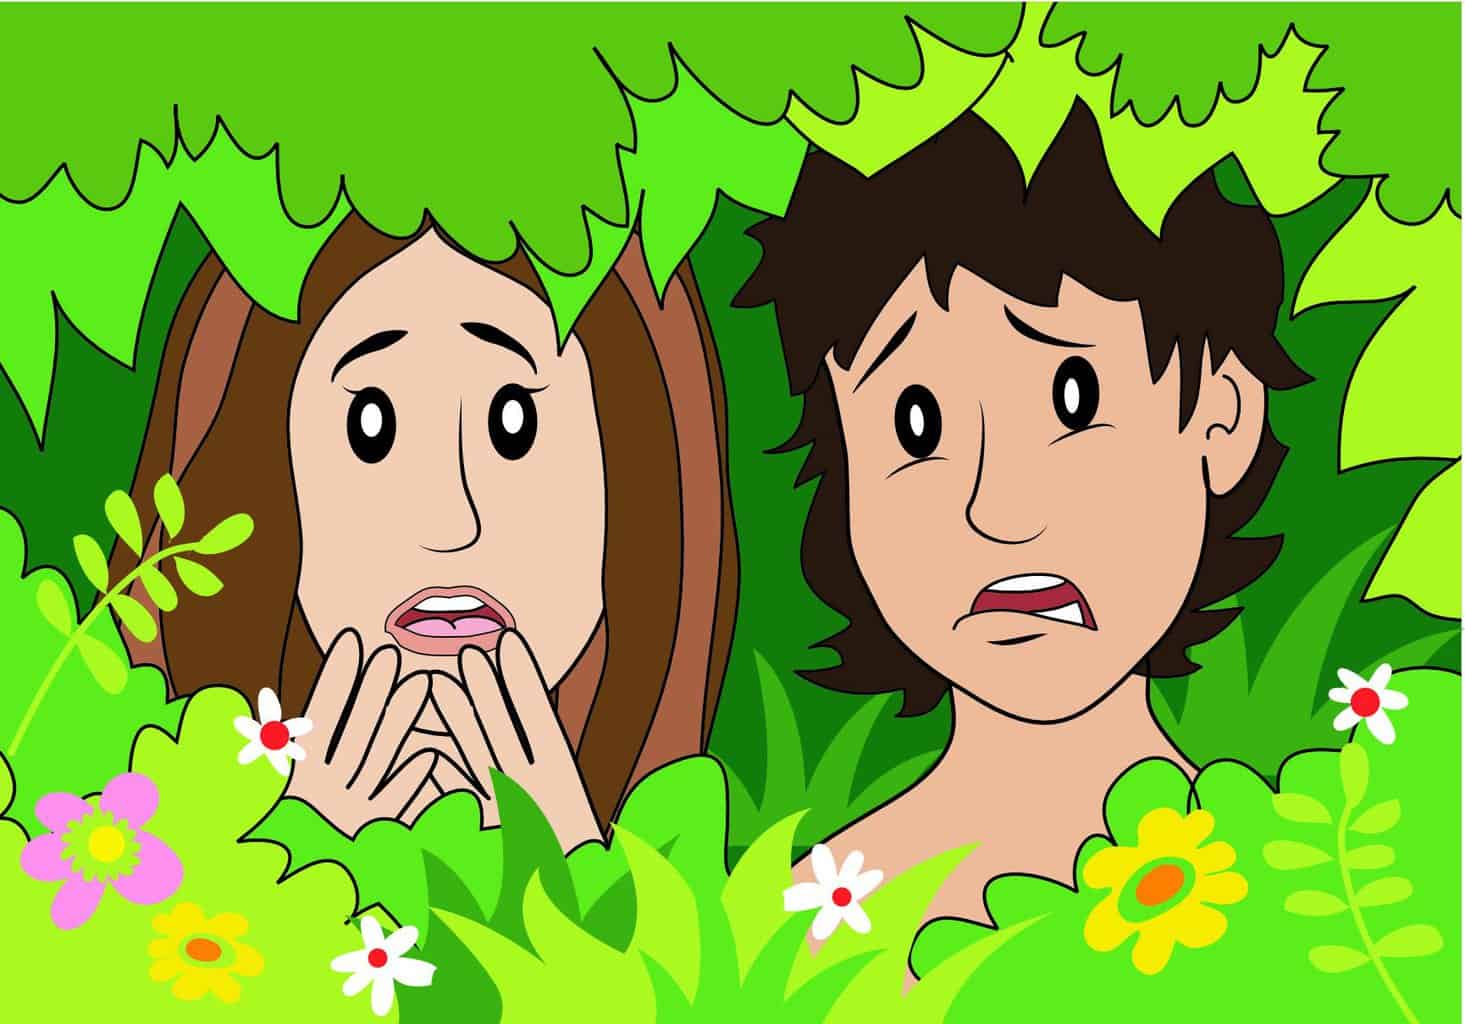 adam and eve for kids